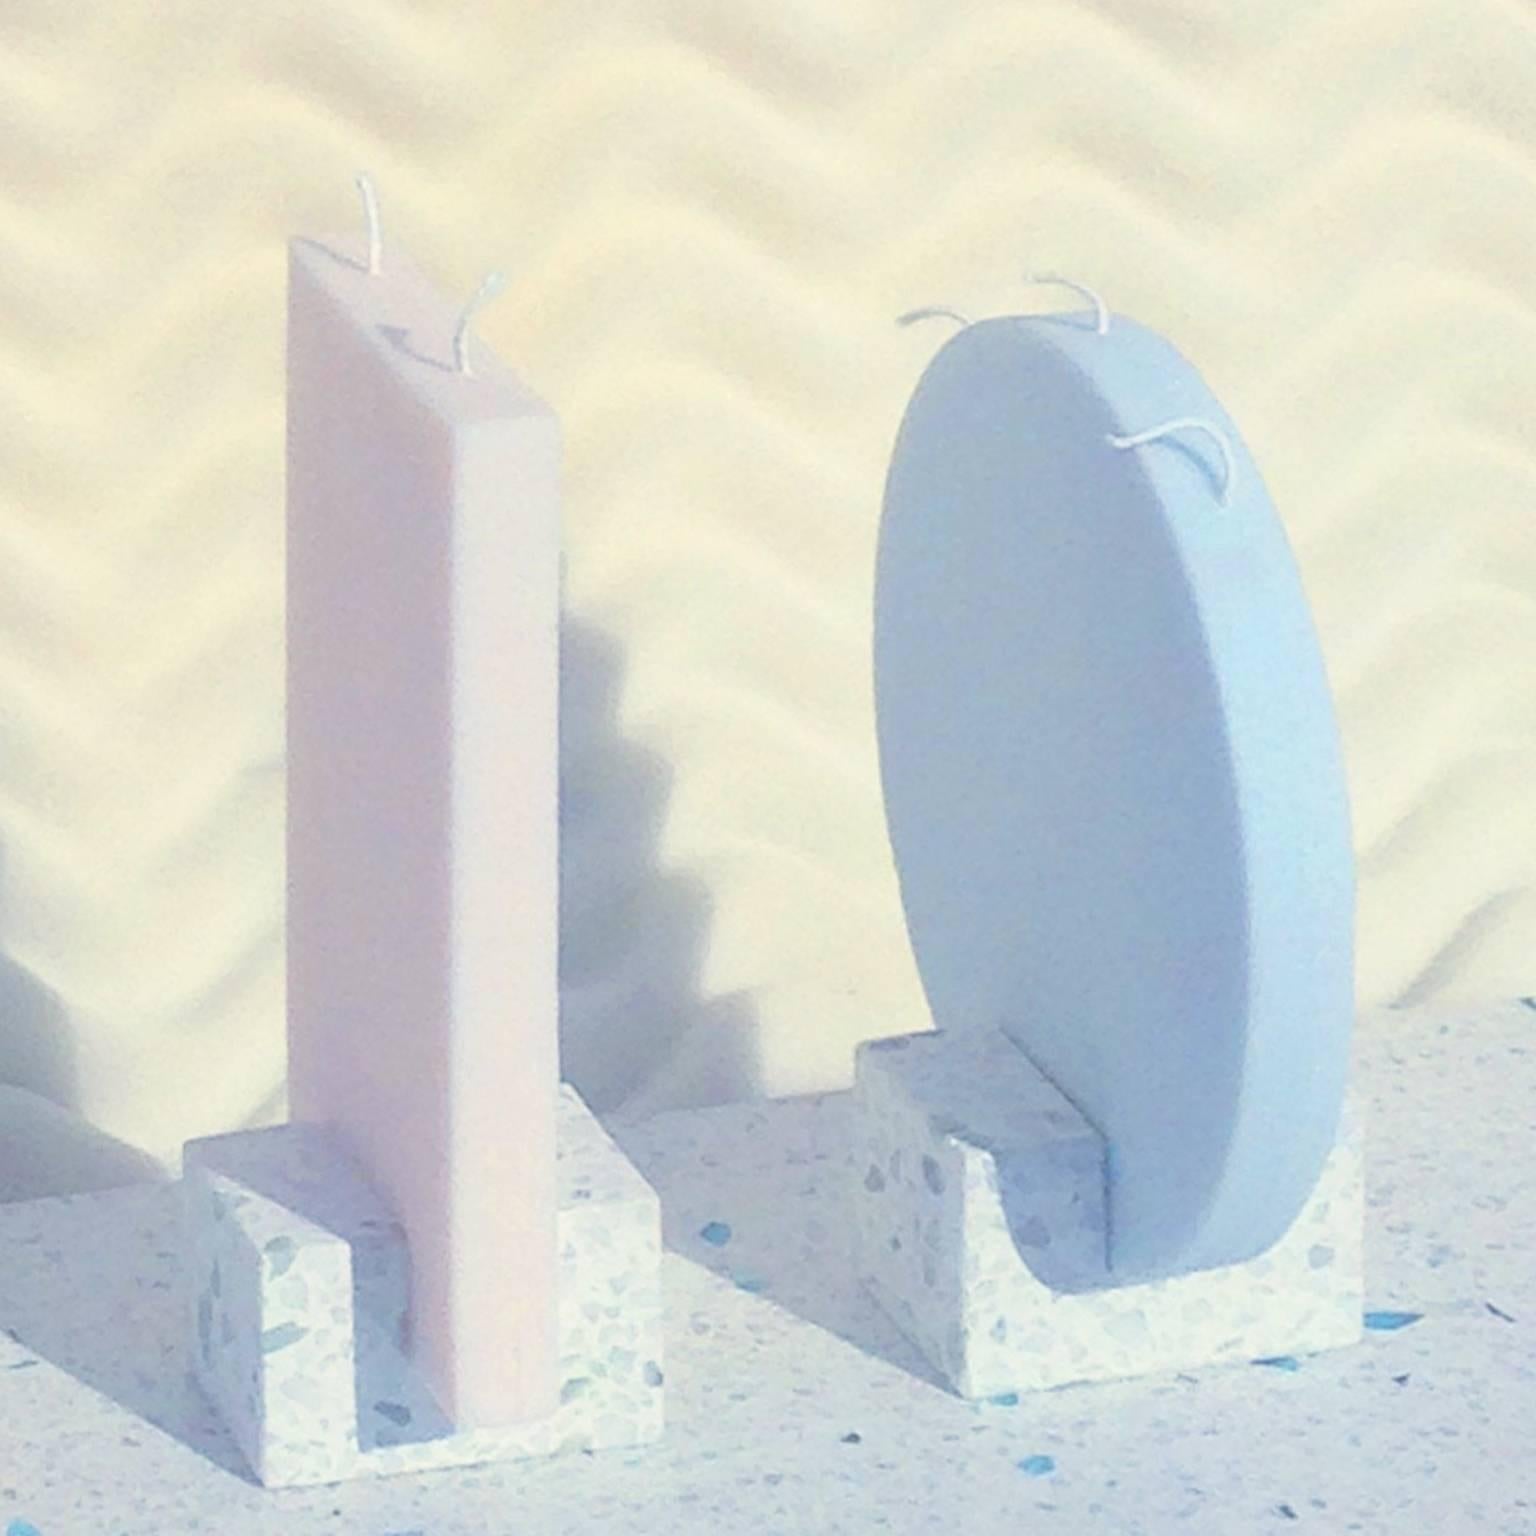 The Monolith contemporary hand-cast terrazzo candle holders were conceived in collaboration with Jessica Martin (Nun) and inspired by the designers' surrounding architectural landscapes. Both from Miami, they borrowed elements of Art Deco